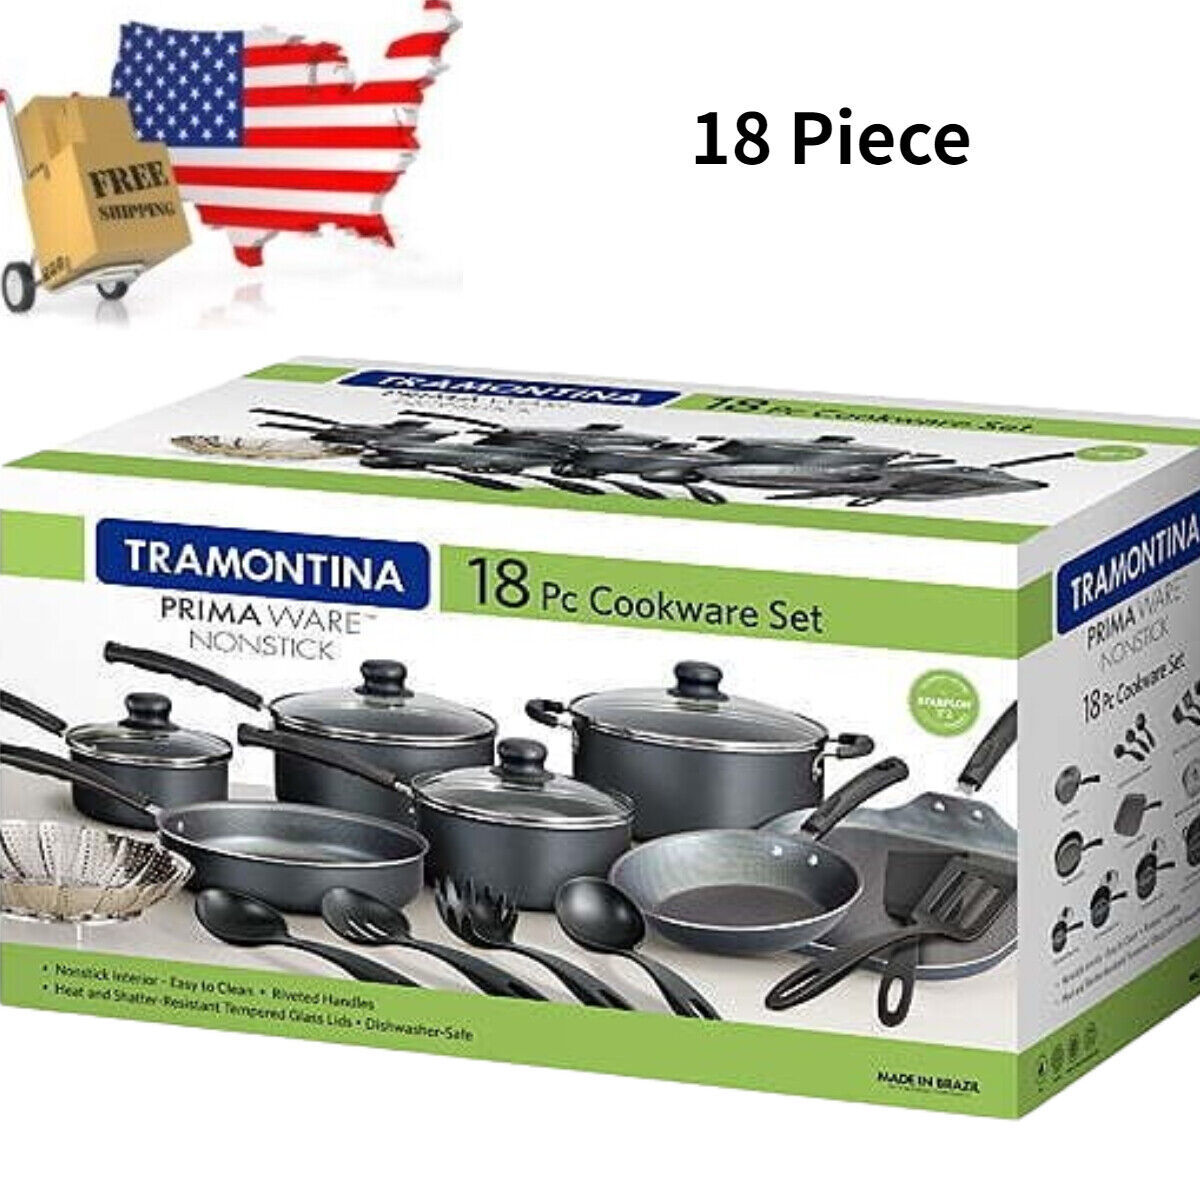 Dropship Primaware 18 Piece Non-stick Cookware Set, Steel Gray to